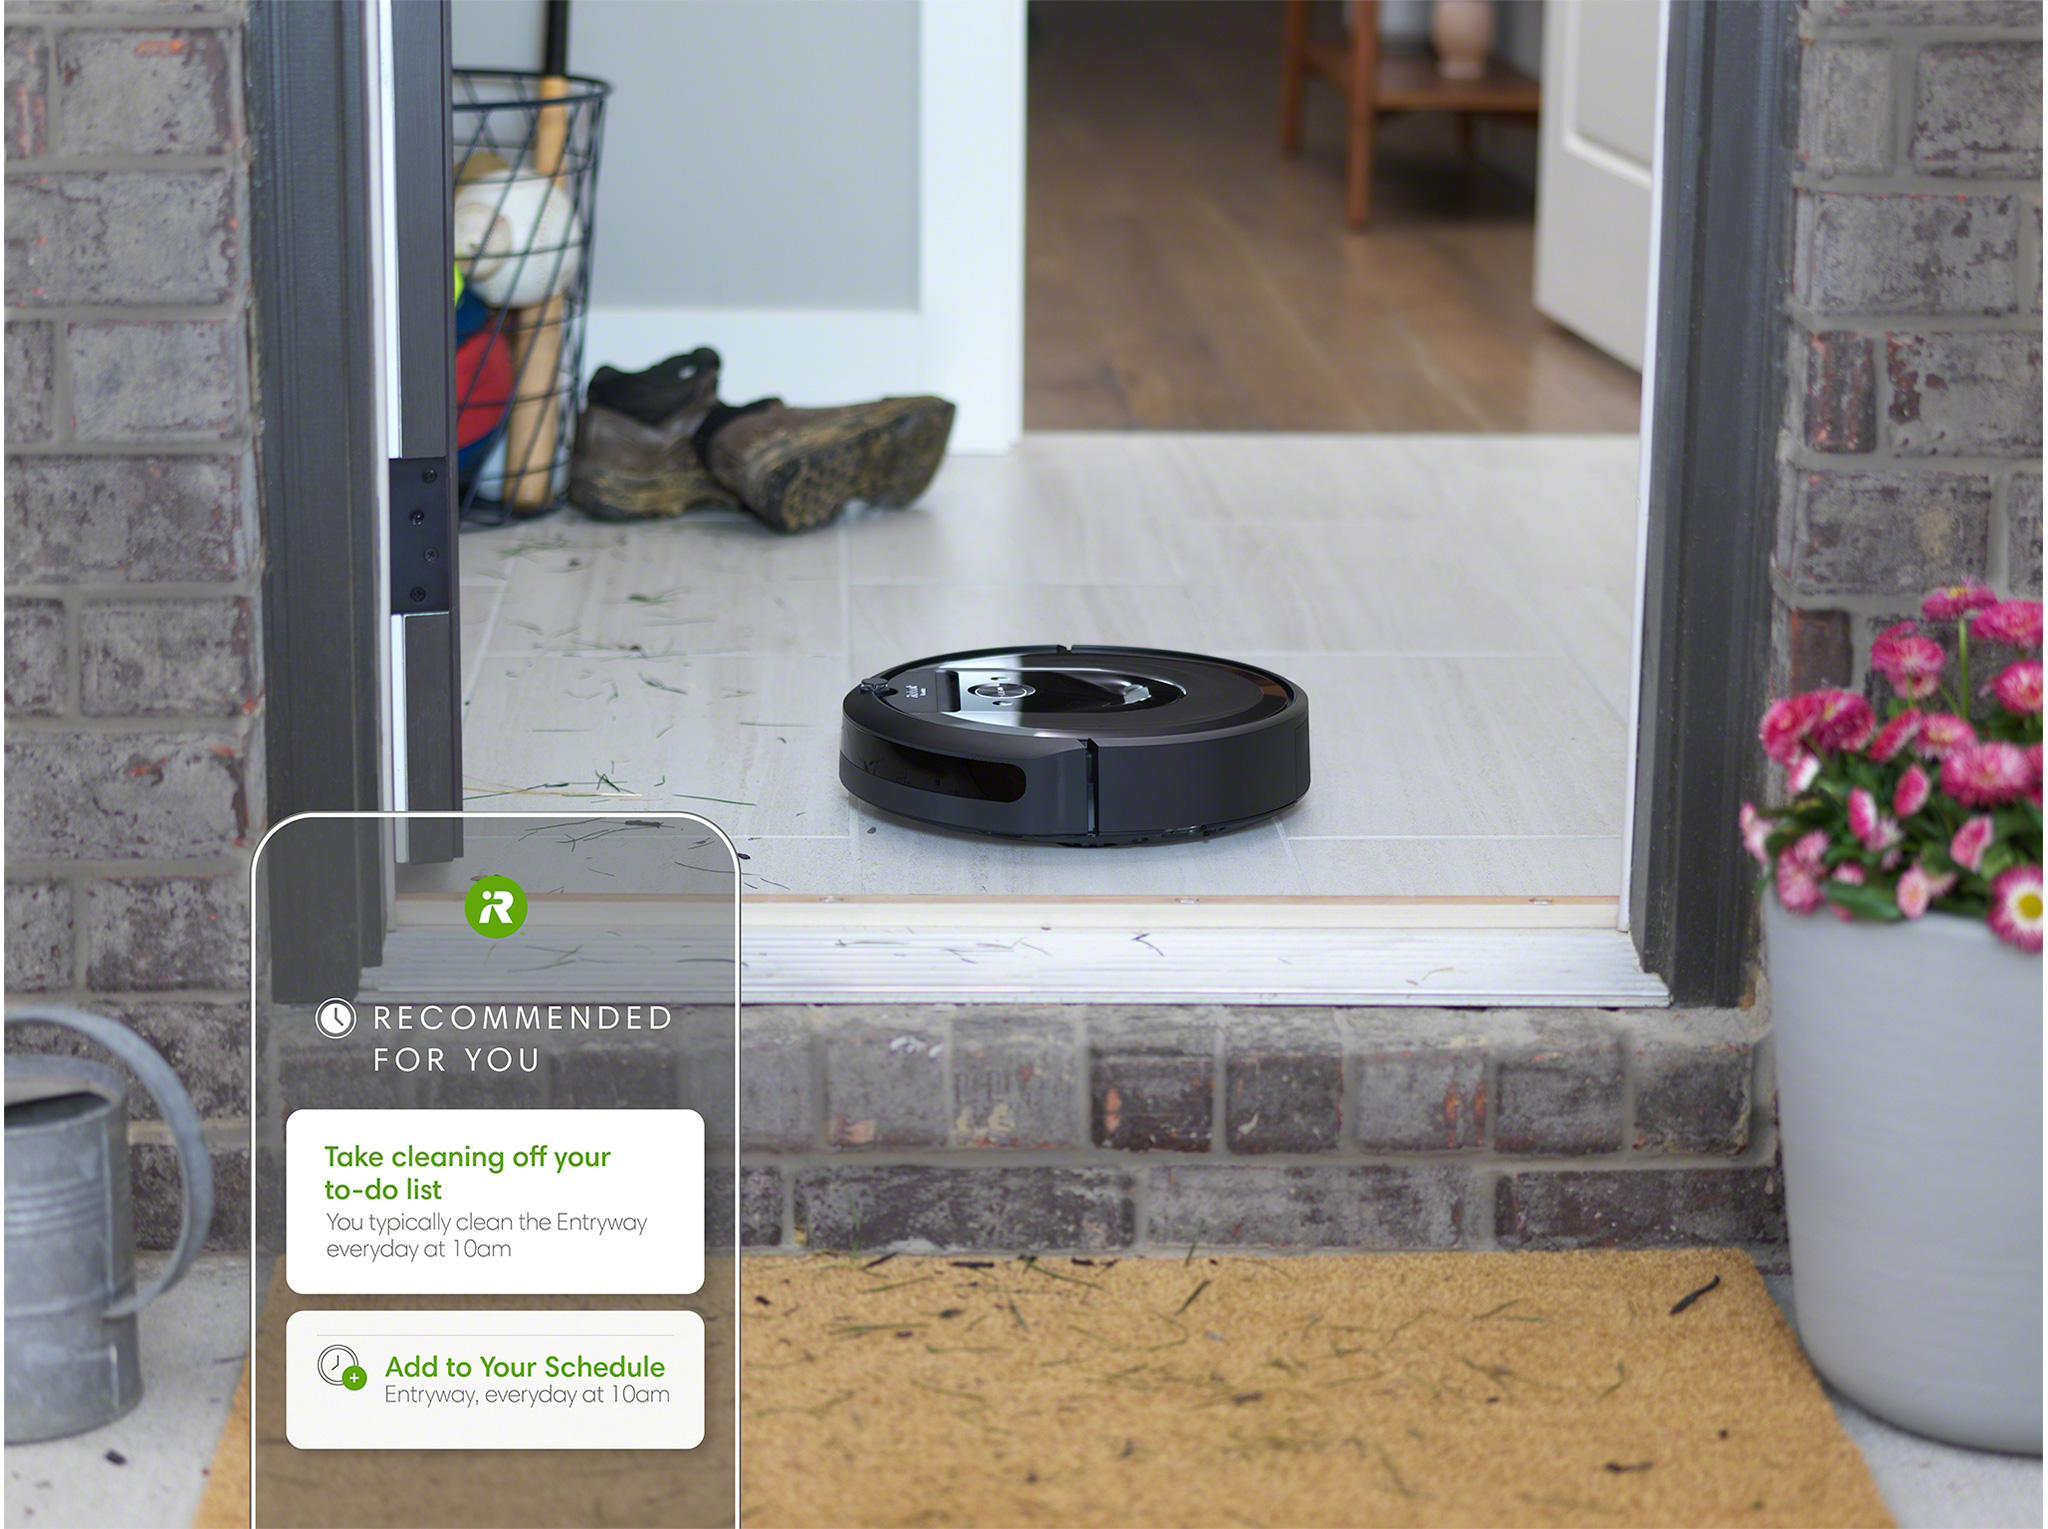 The new iRobot Home App can recommend cleaning schedules based on users’ more common cleaning patterns like cleaning on Monday mornings. Roomba robot vacuums and Braava robot mops with Imprint™ Smart Mapping can also provide room-specific recommendations like vacuuming the living room on Friday evenings, or in the dining room and kitchen after meals.